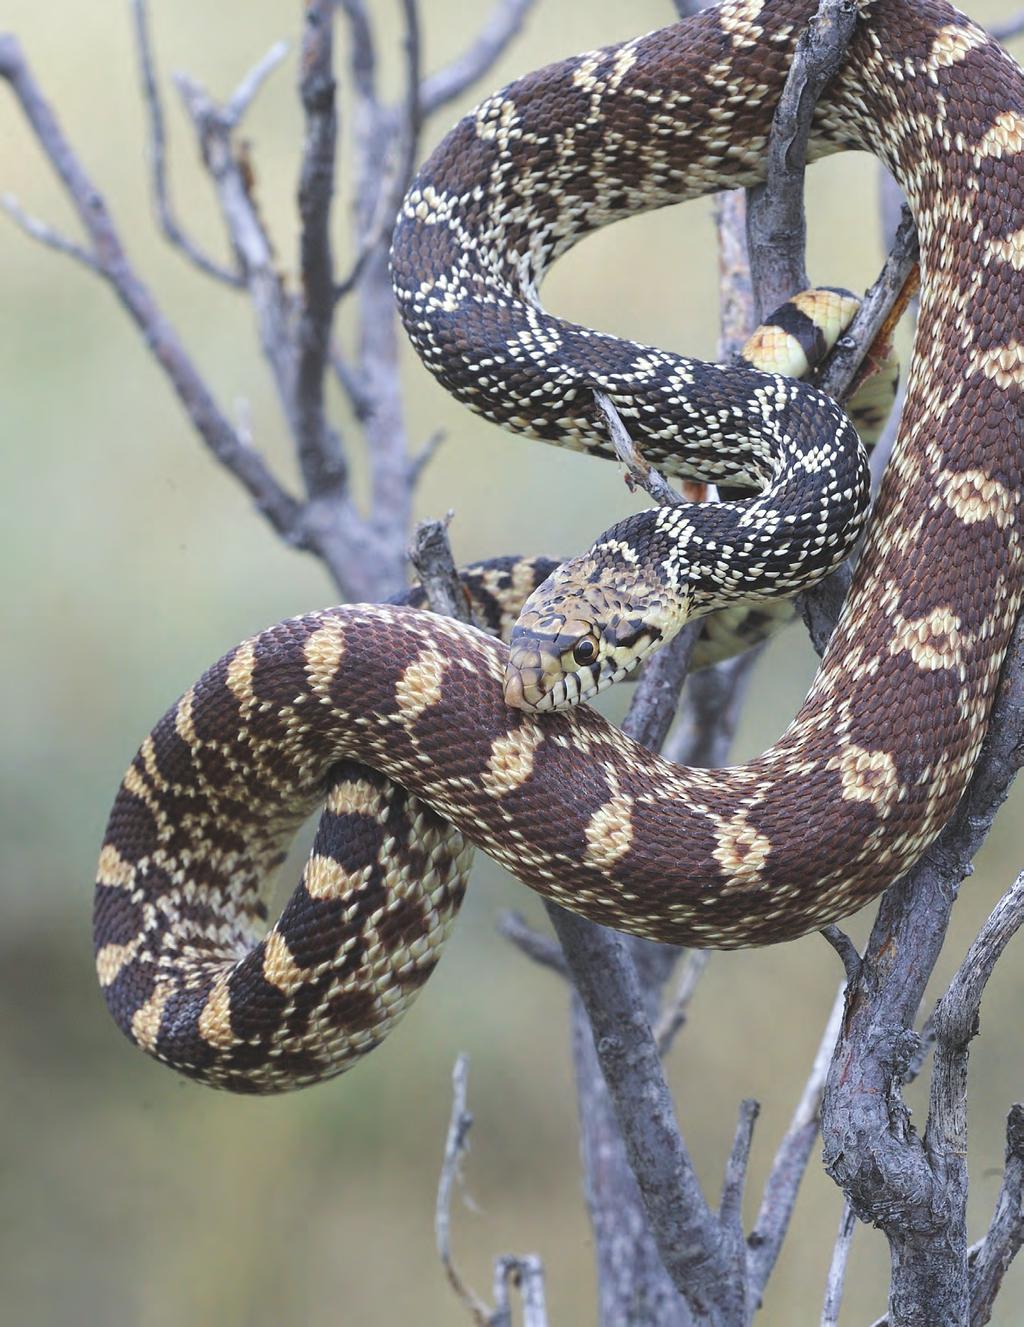 bullsnake The bullsnake is the largest species of snake in Alberta and the only one that kills its prey by constriction meaning that they squeeze their prey in one or two of their powerful coils